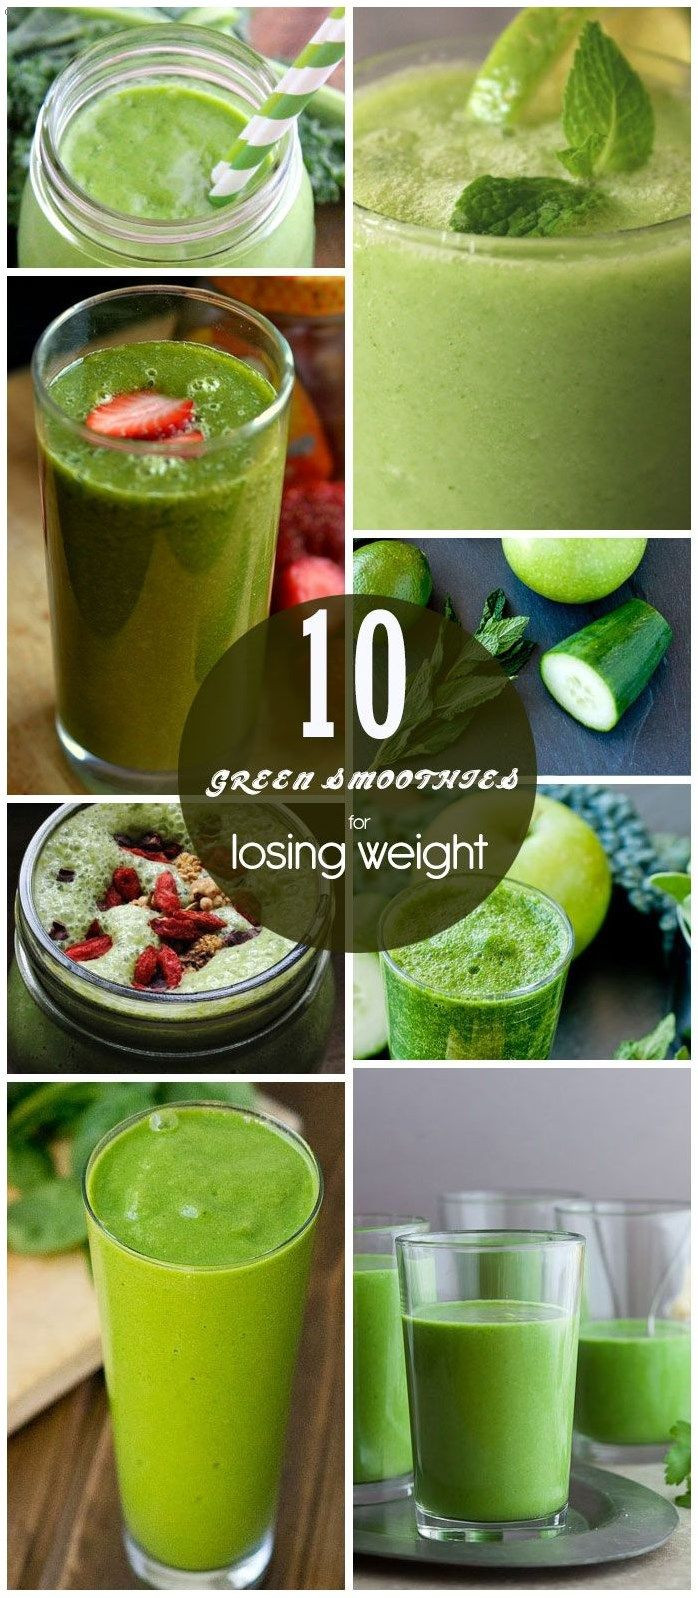 Green Smoothies For Weight Loss Success
 7 Healthy Green Smoothies to Lose Weight